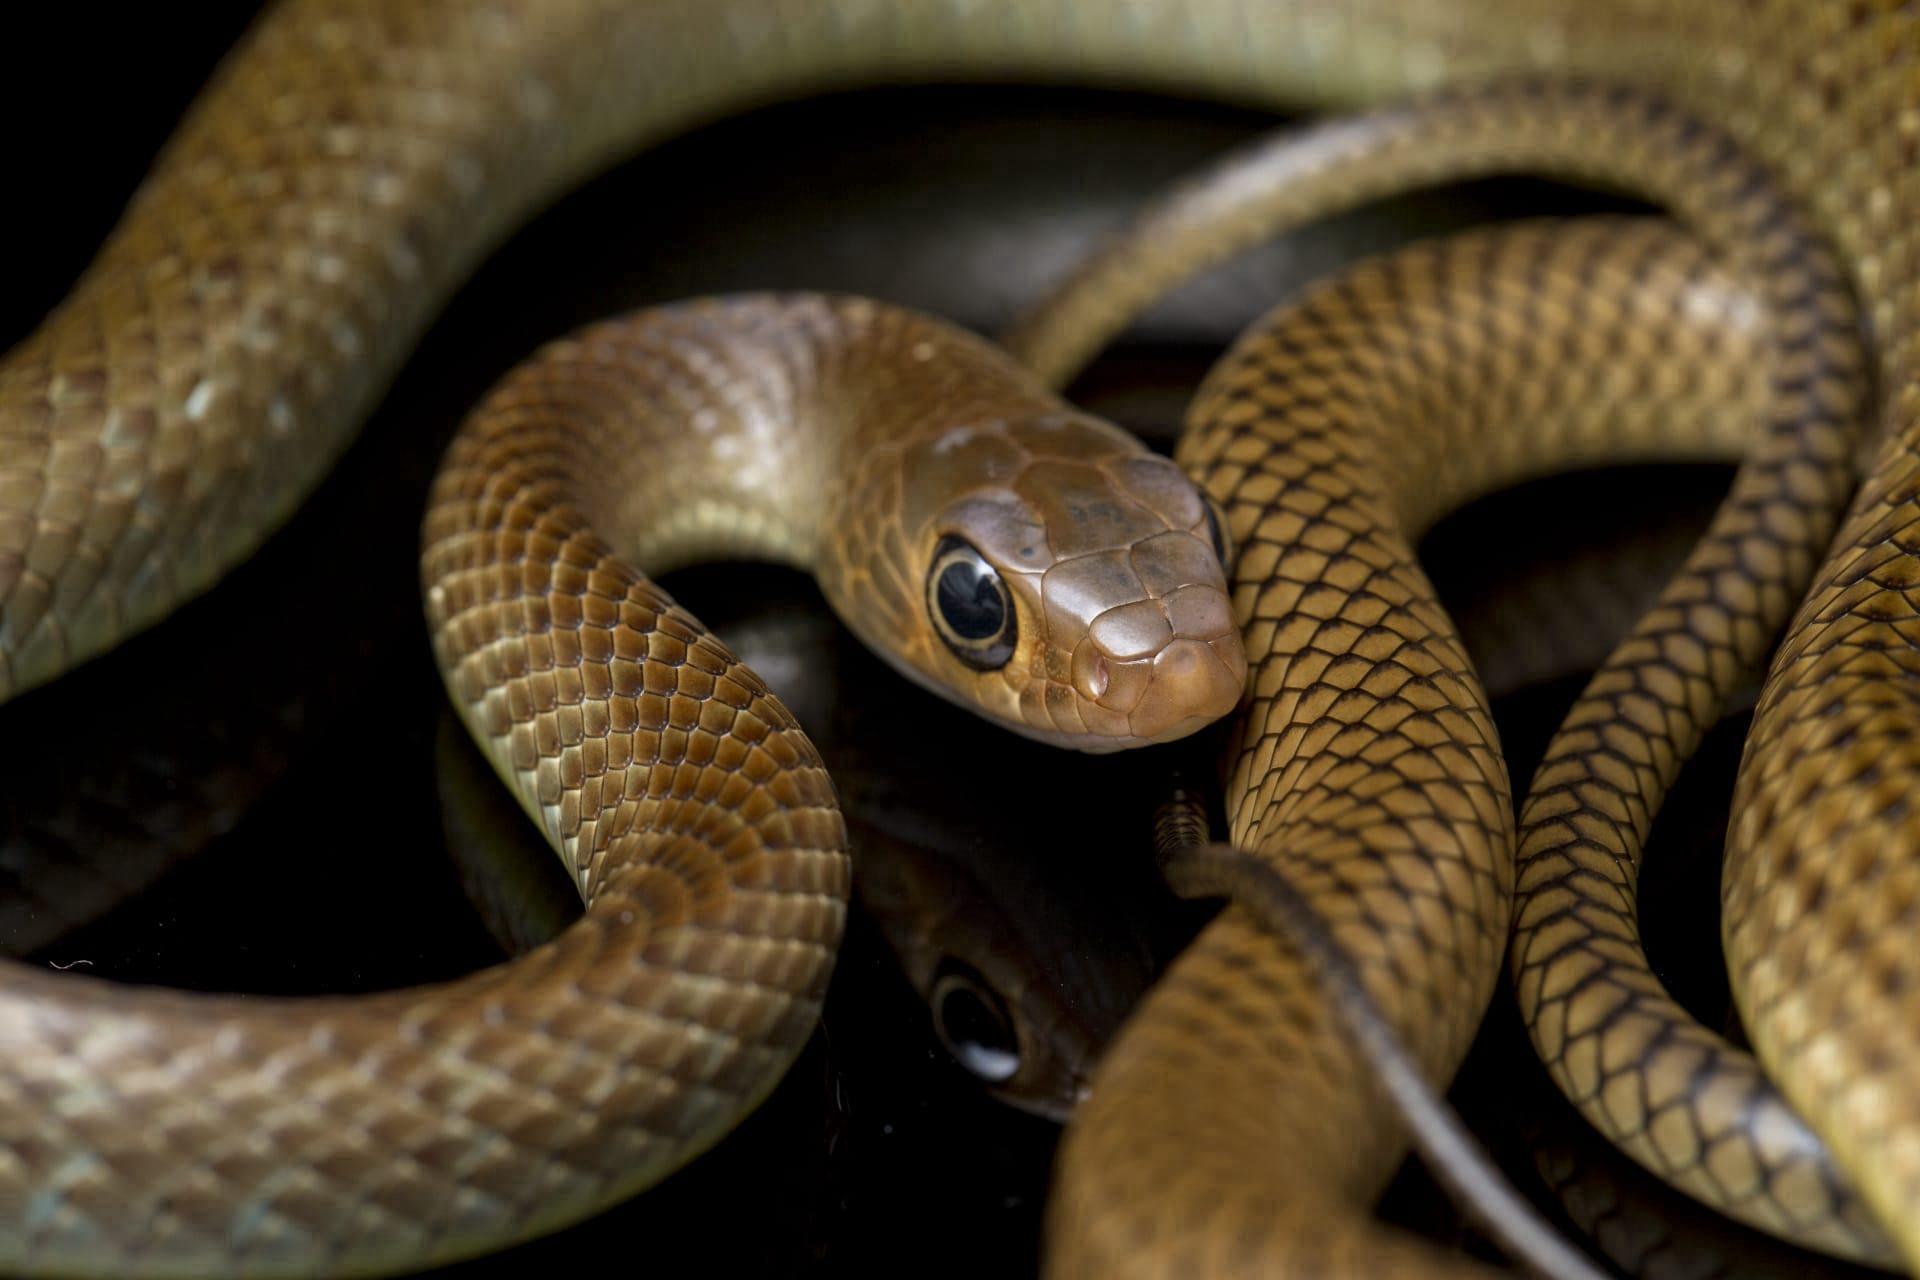 Brown snake pictures